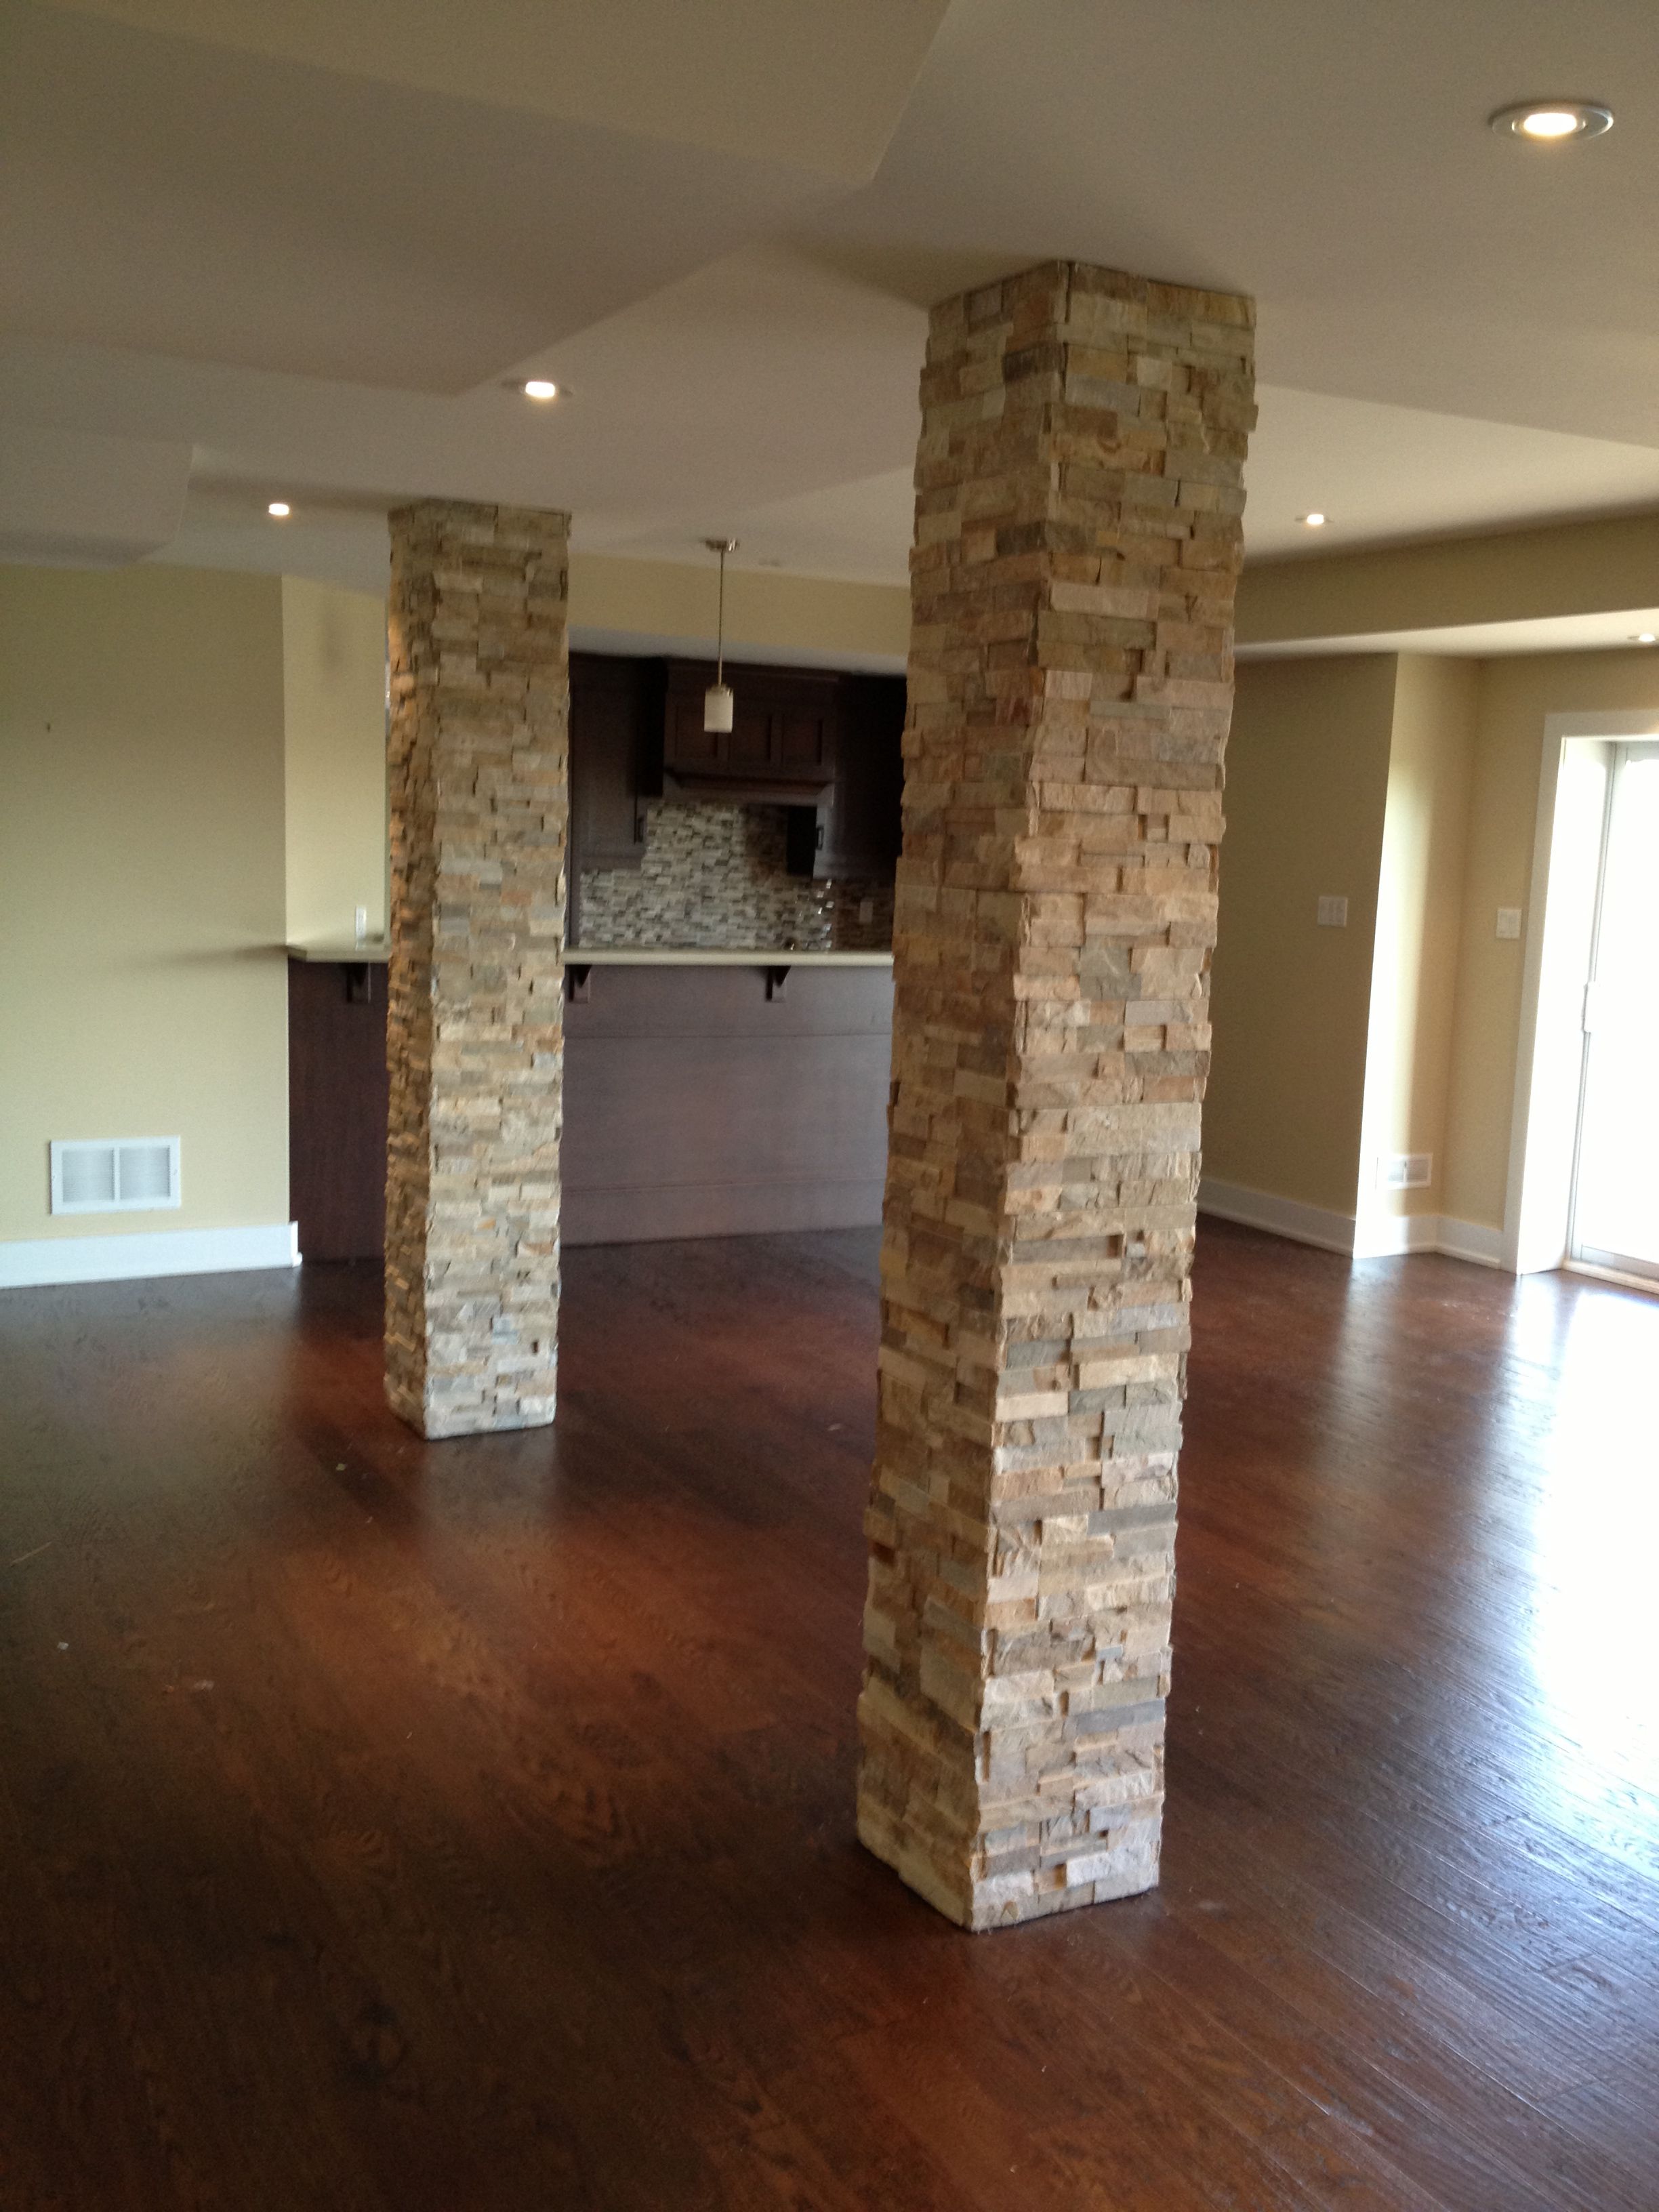 Making The Most Of Basement Columns And Beams